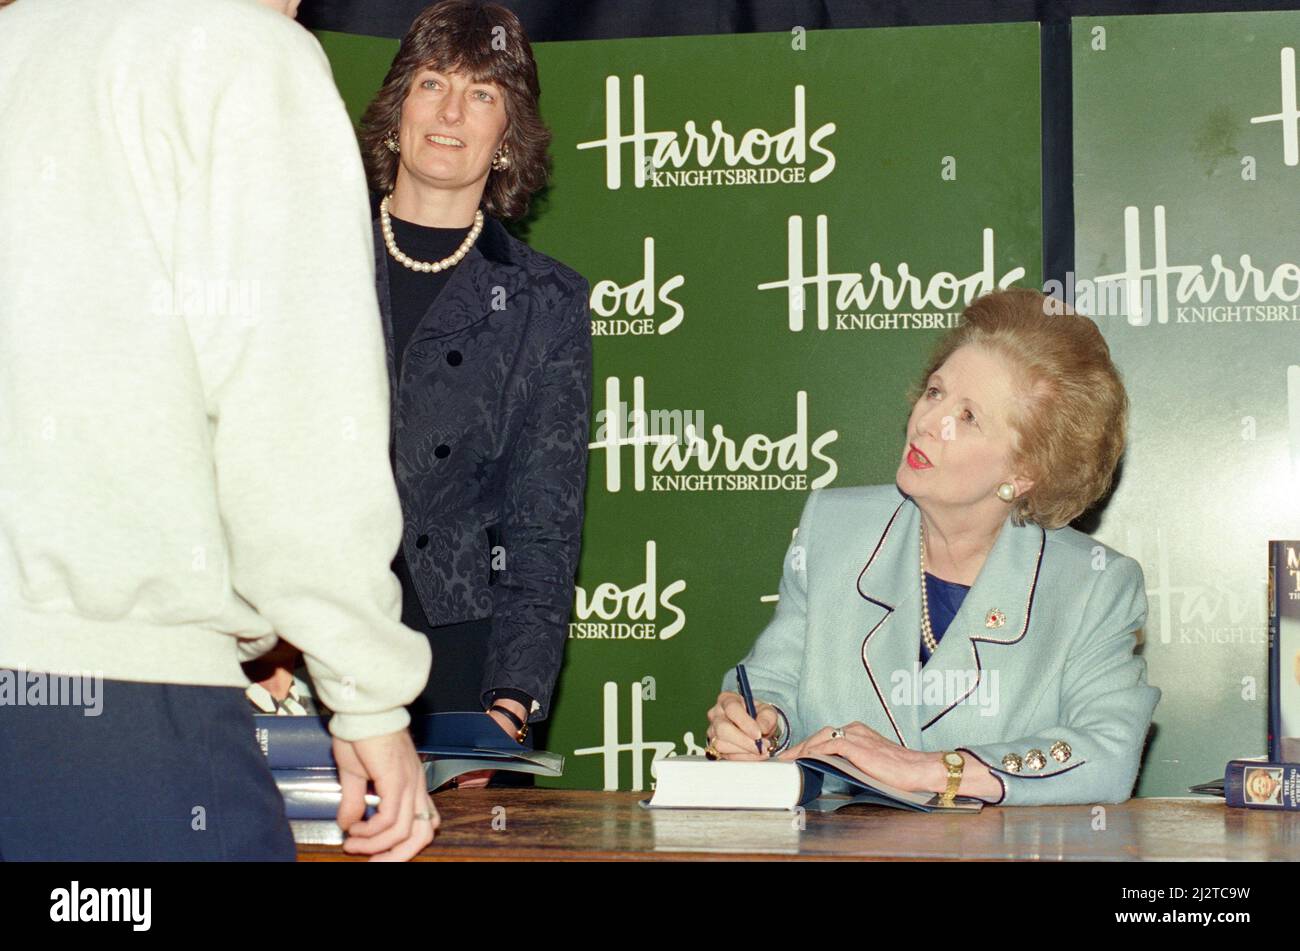 Margaret Thatcher in Harrods signing copies of her memoir 'The Downing Street years'. London, 18th October 1993. Stock Photo